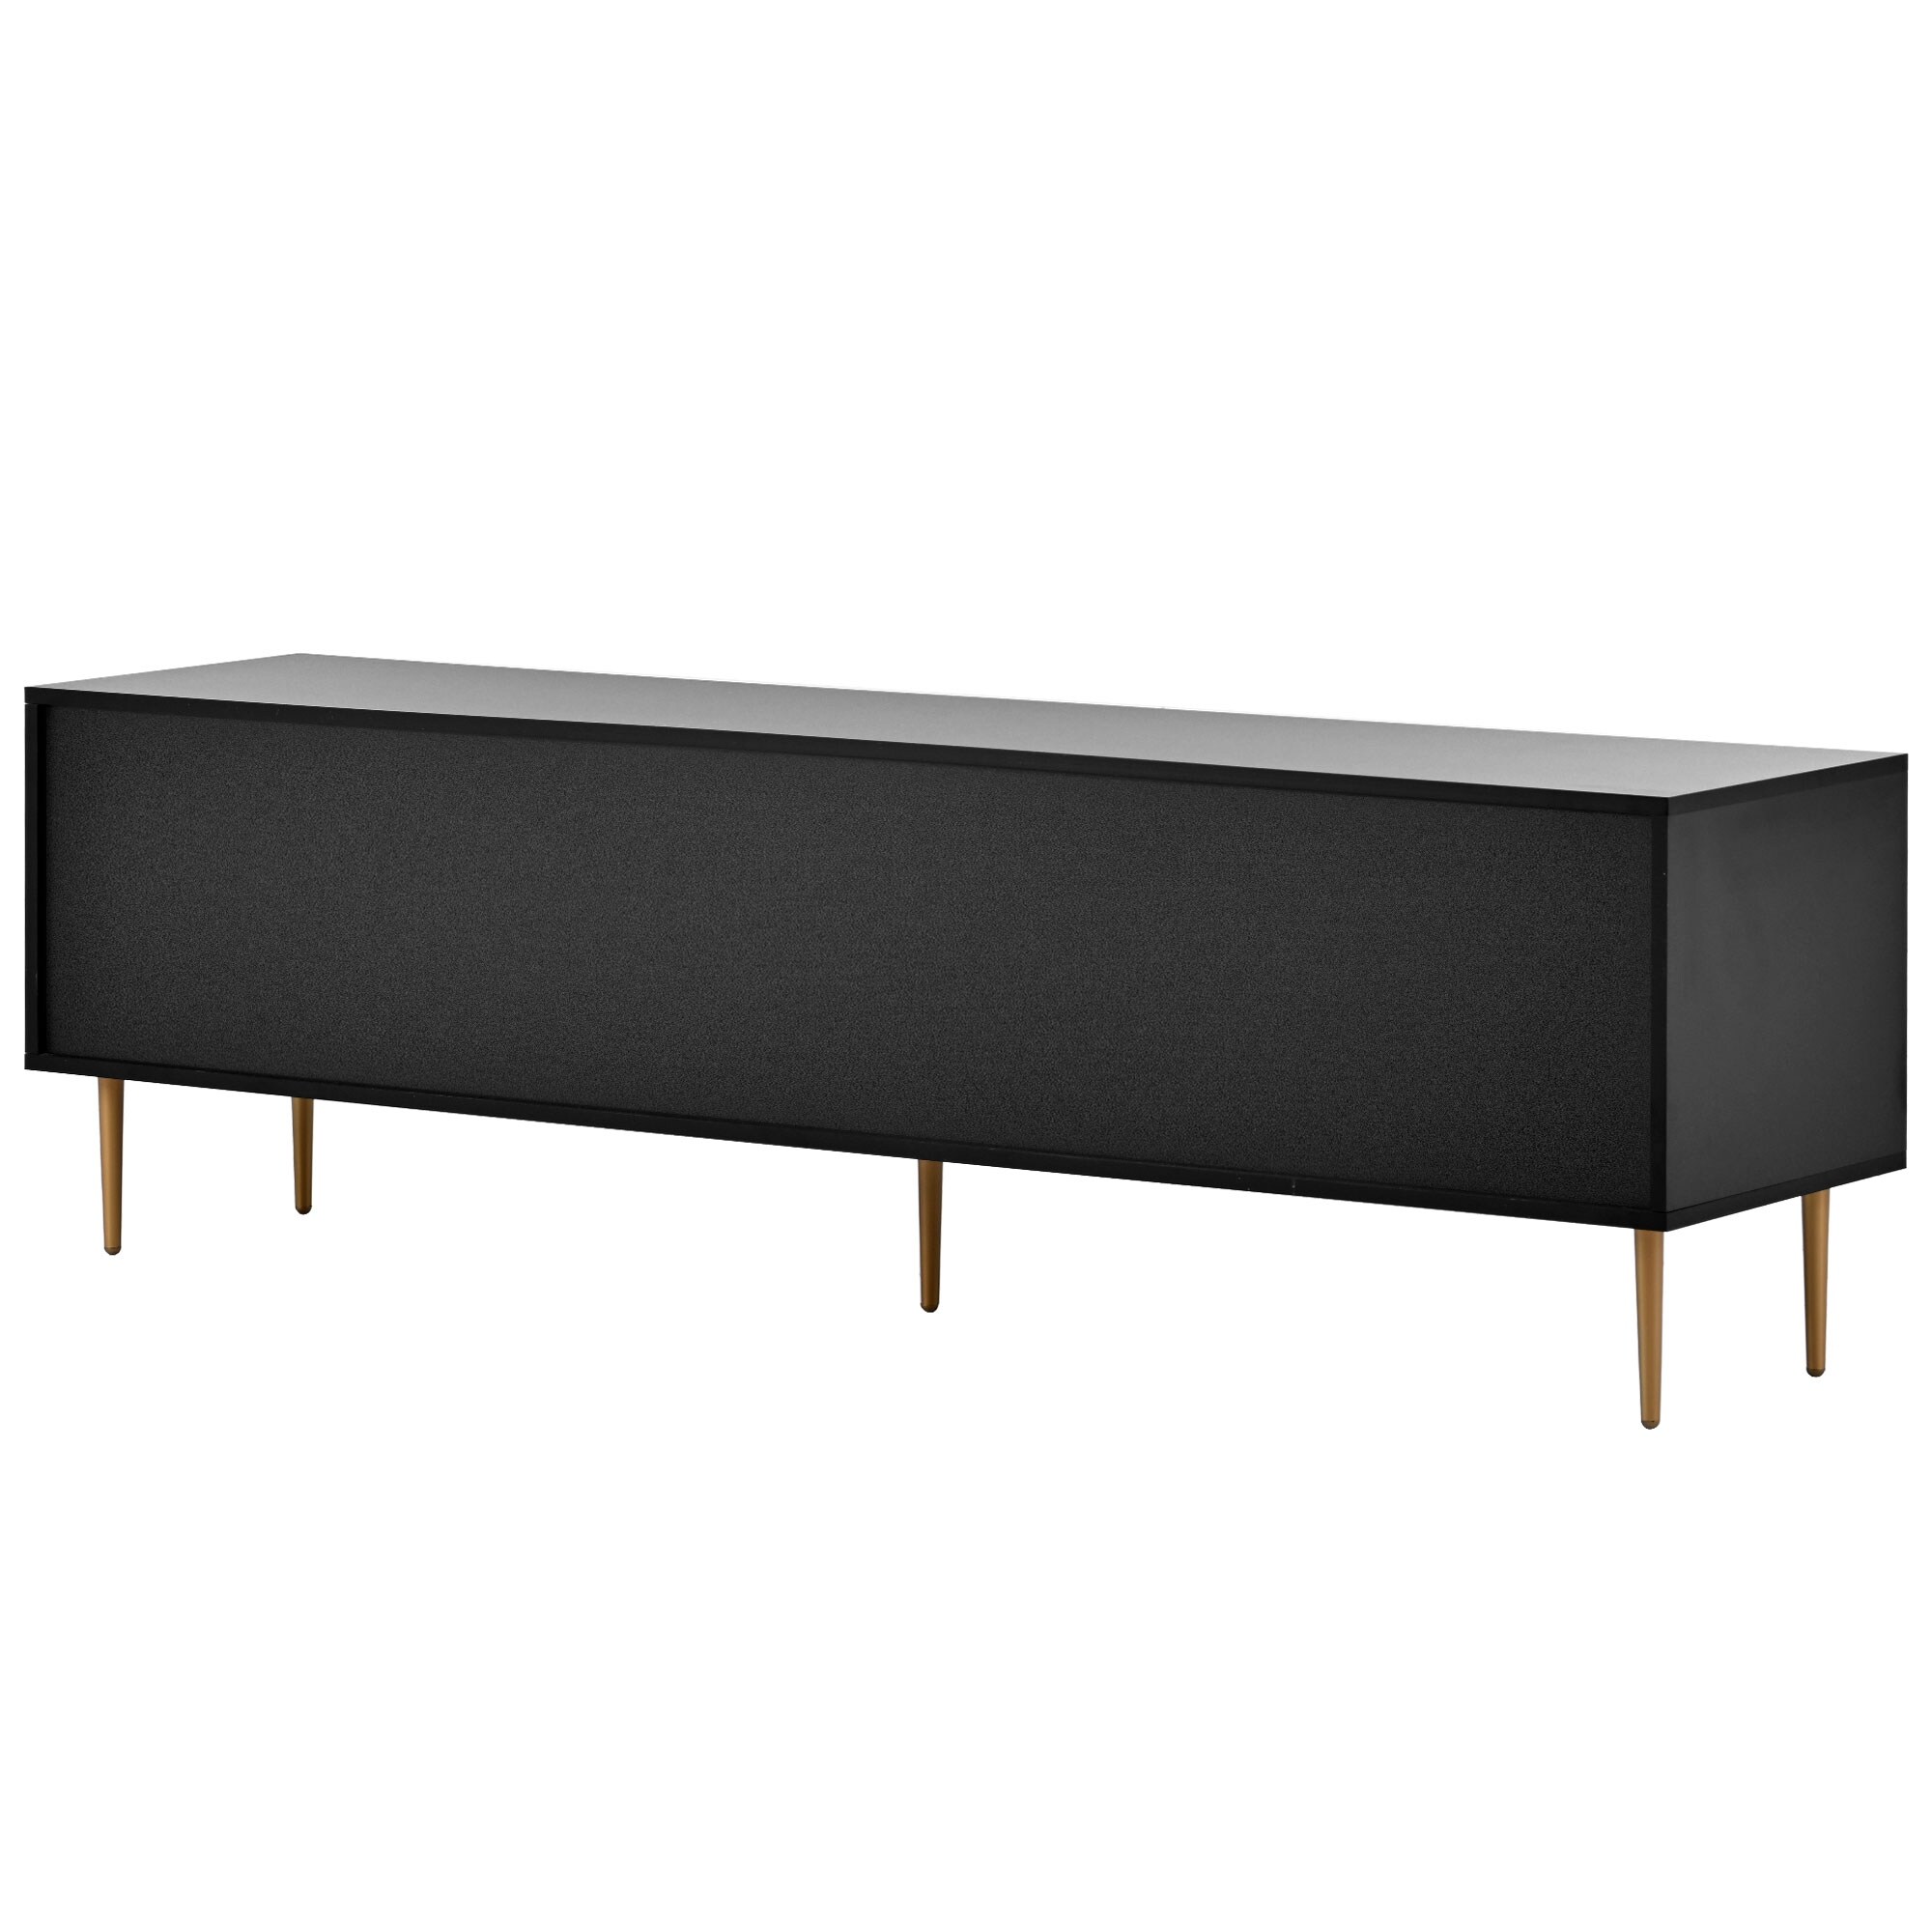 Black Modern TV Stand with 5 Champagne Legs, Spacious Storage for TV Equipment and Accessories, Fits TVs up to 75''